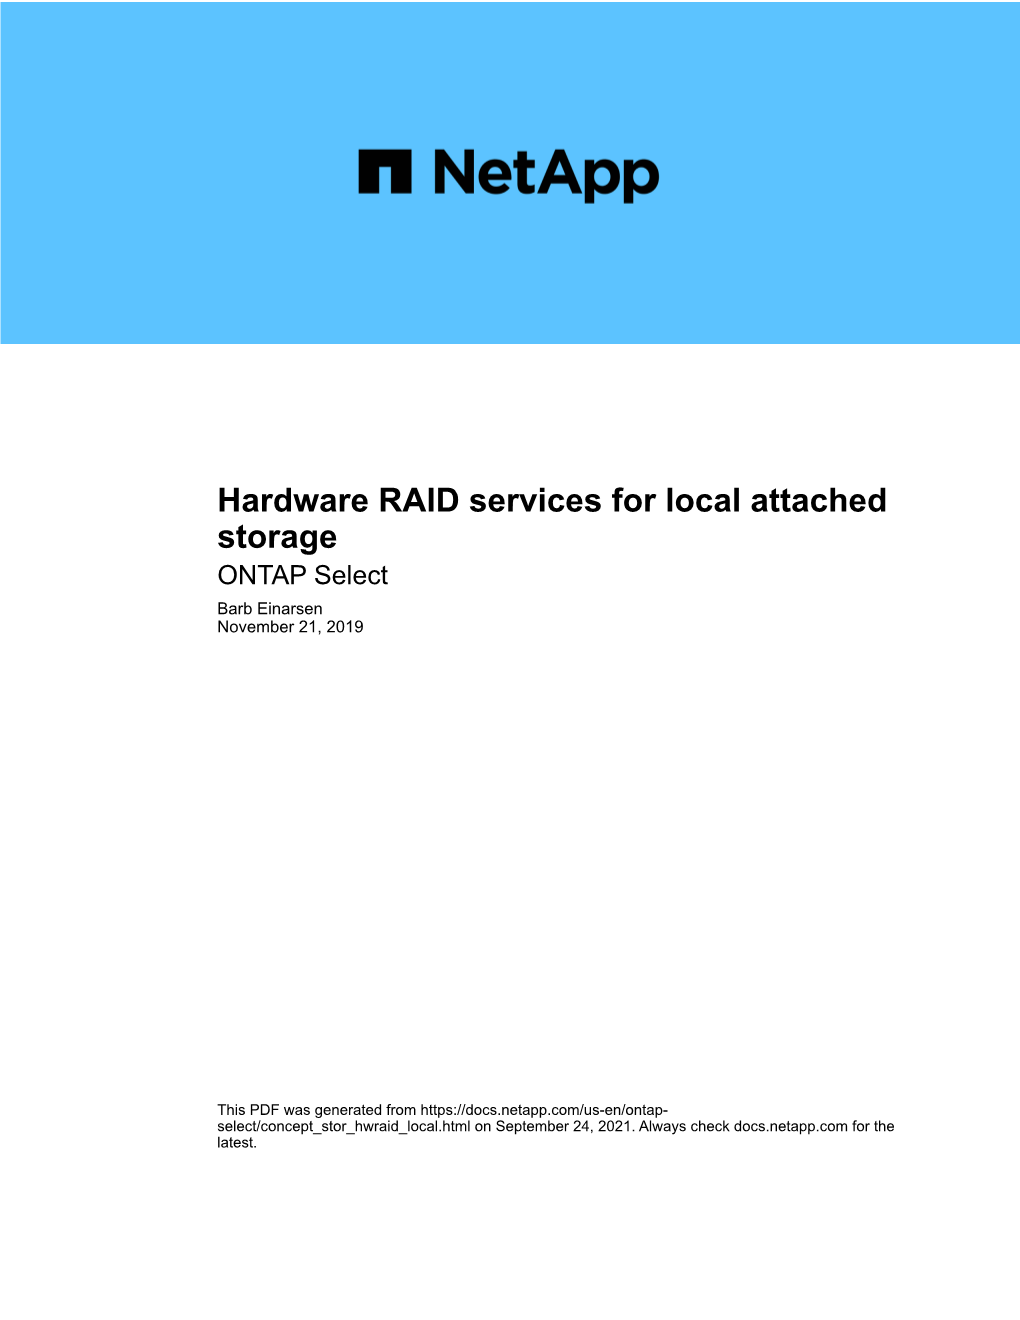 Hardware RAID Services for Local Attached Storage : ONTAP Select